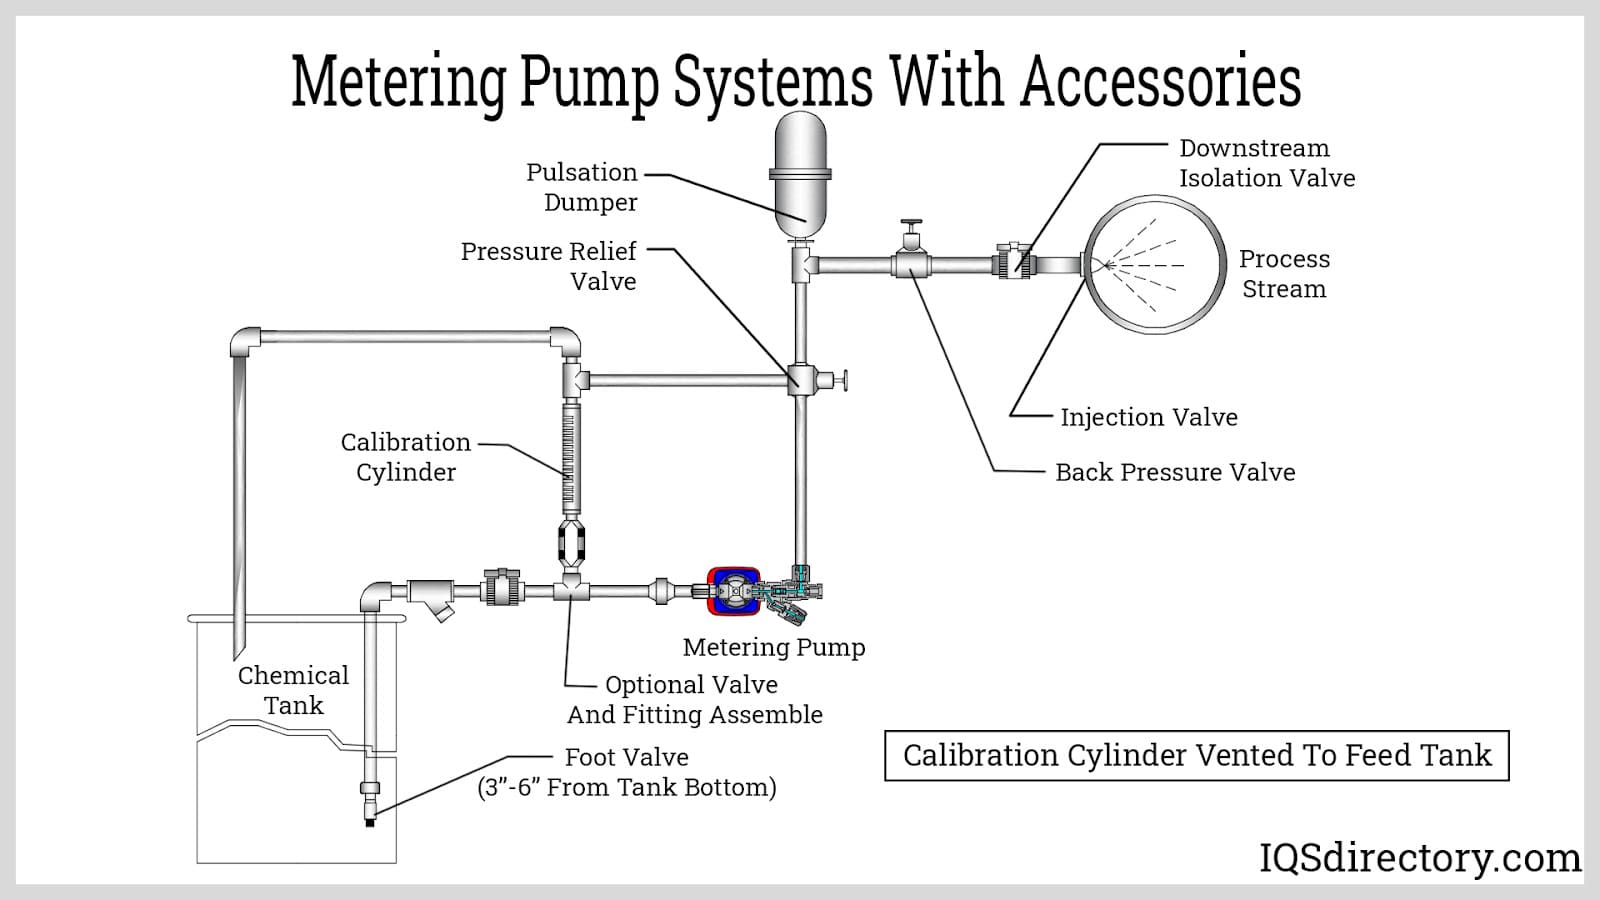 Metering Pump Systems With Accessories